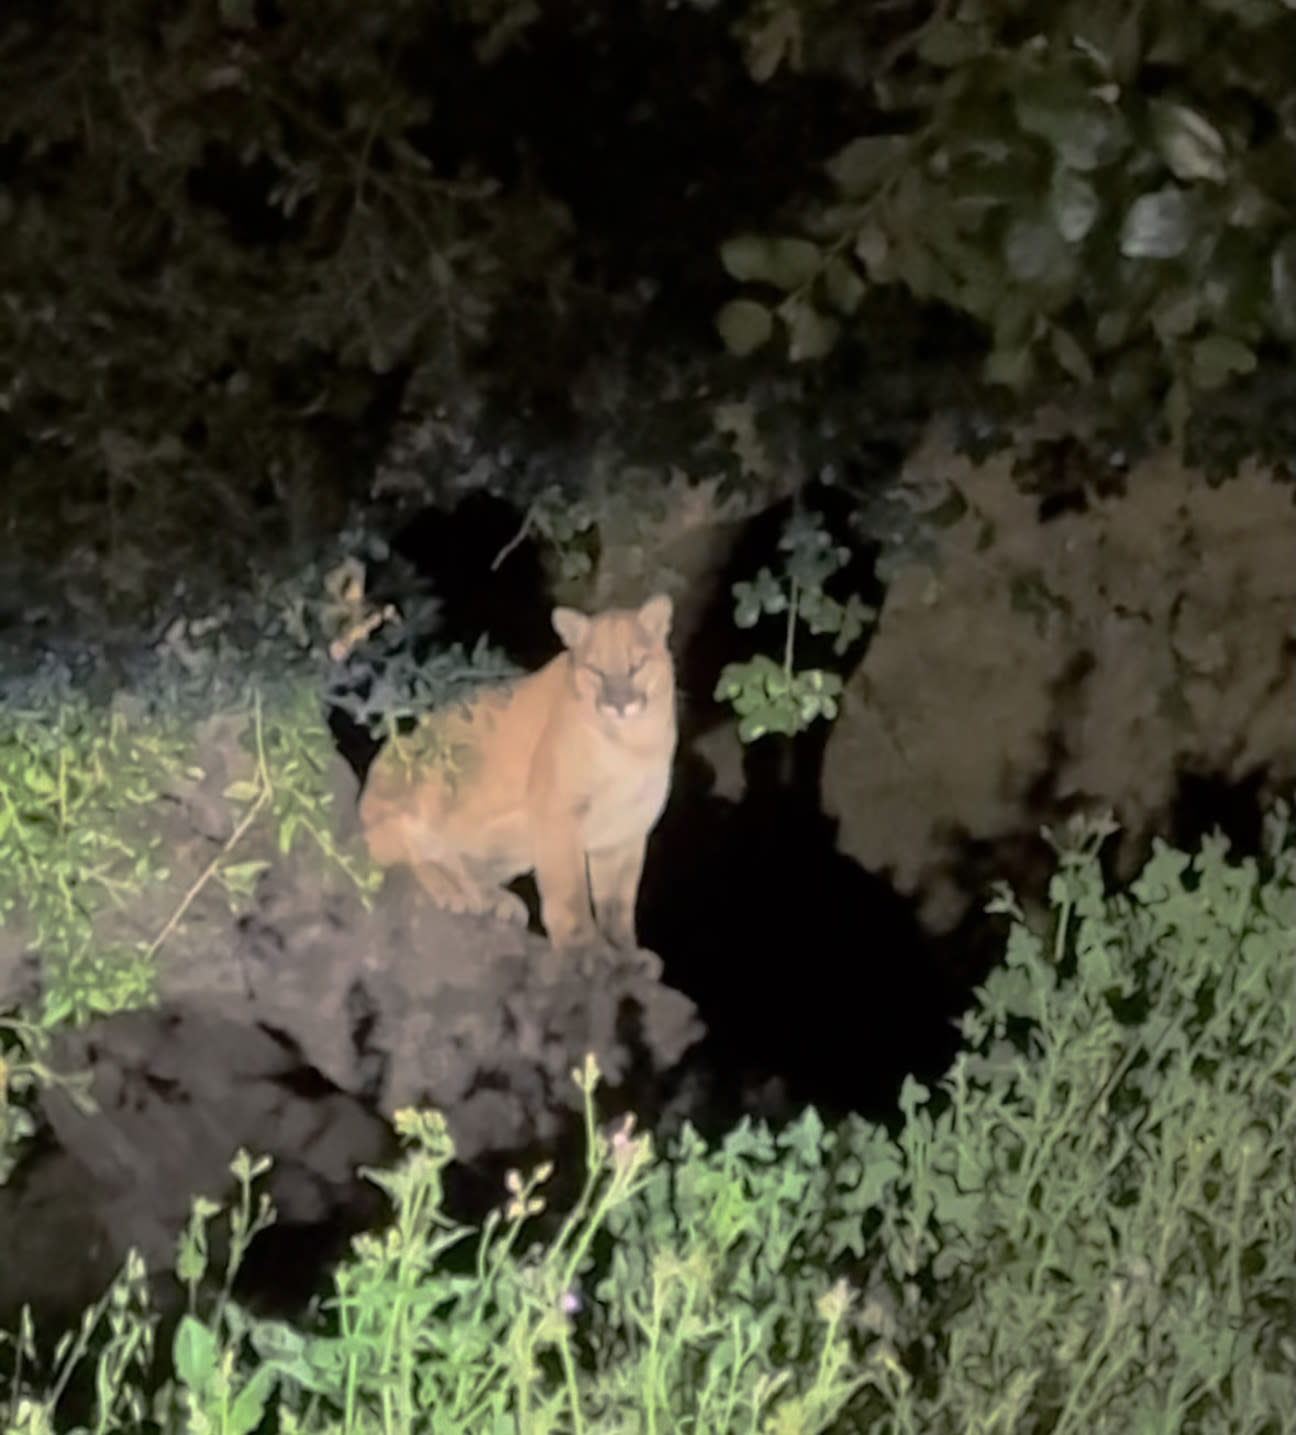 Unconfirmed sighting of mountain lion near Griffith Park recalls L.A.'s favorite big cat, P-22